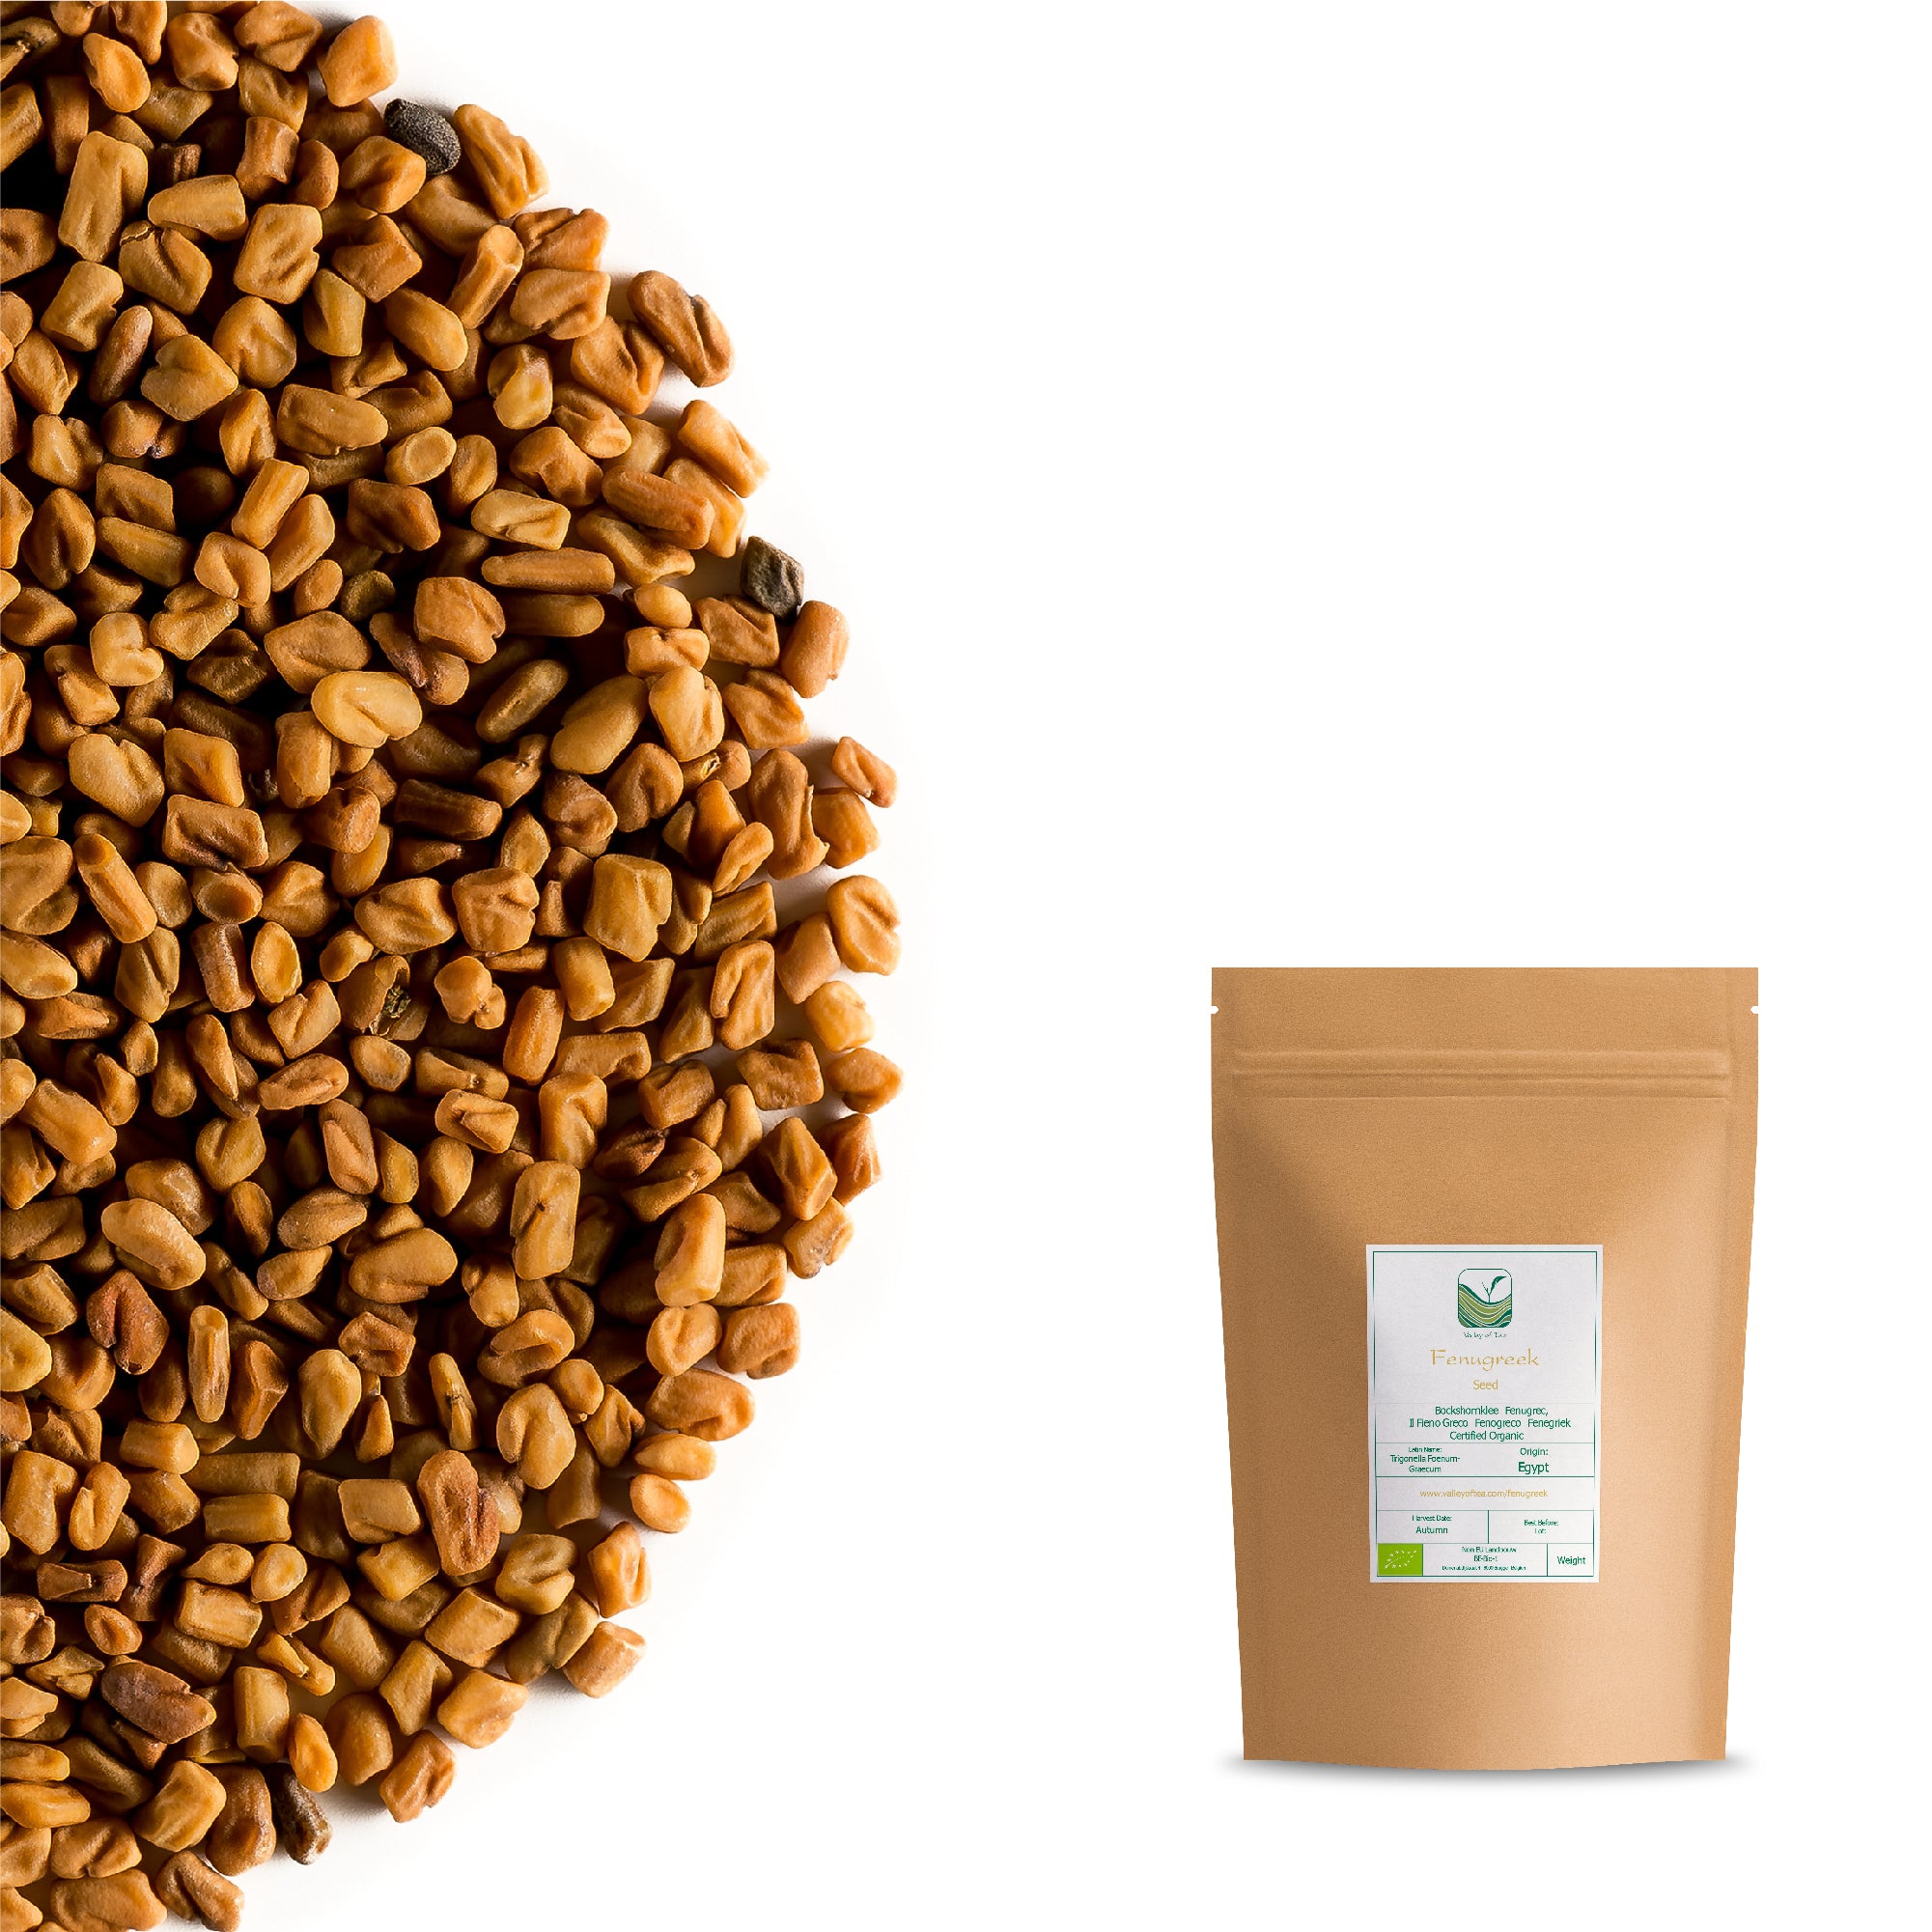 Buy Fenugreek oil-Virgin- Organic with same day delivery at MarchesTAU